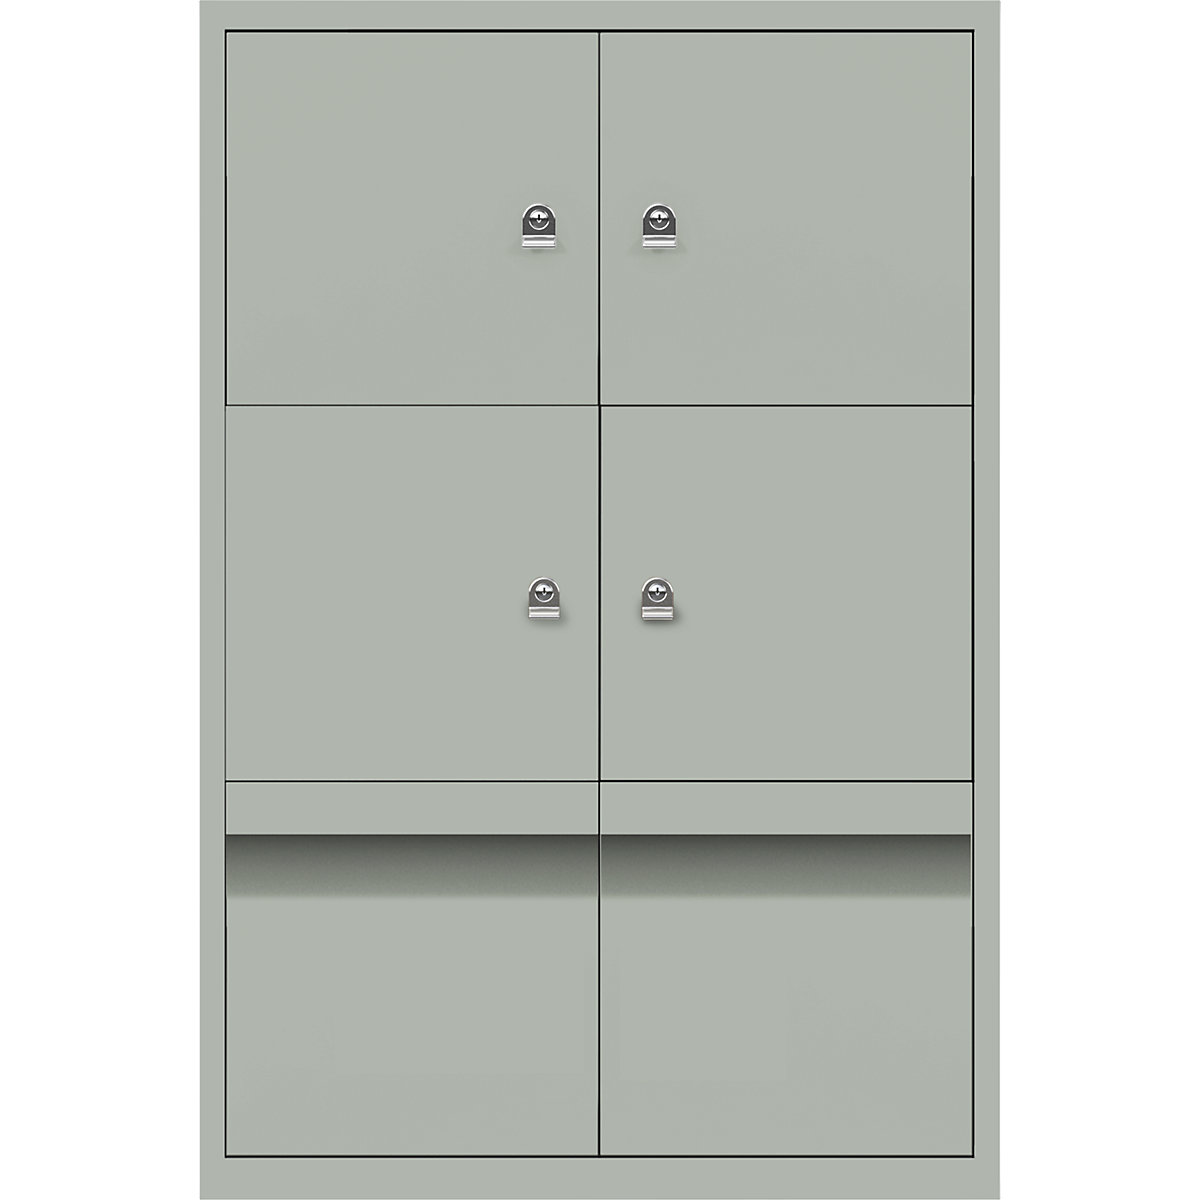 LateralFile™ lodge – BISLEY, with 4 lockable compartments and 2 drawers, height 375 mm each, york-22